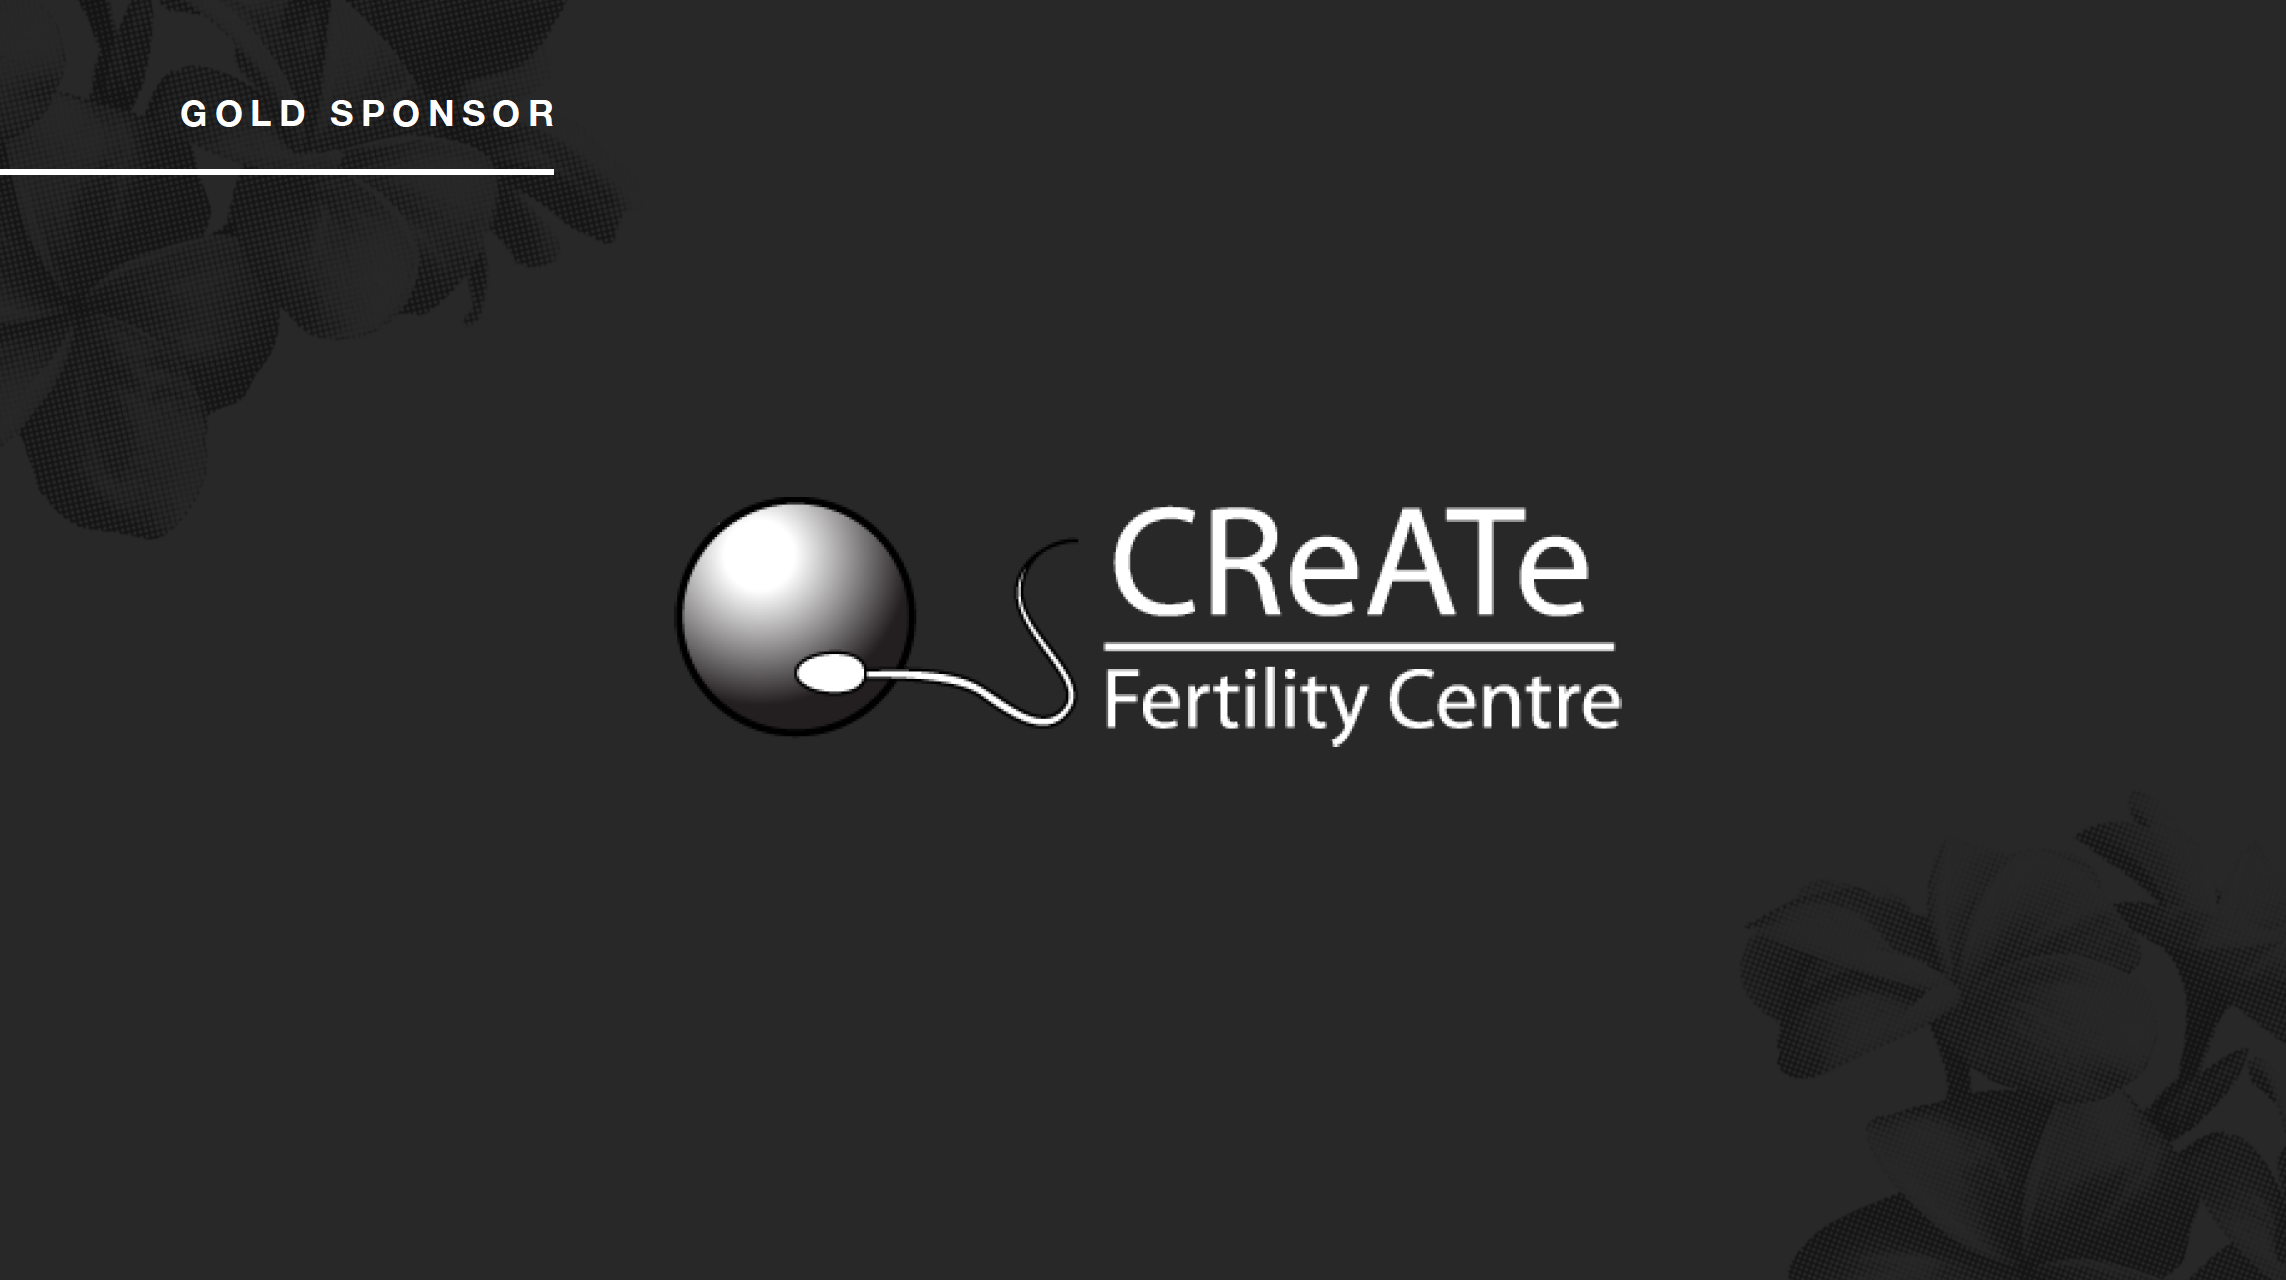 Featured image for “CReATe Fertility Centre – Gold Sponsor”